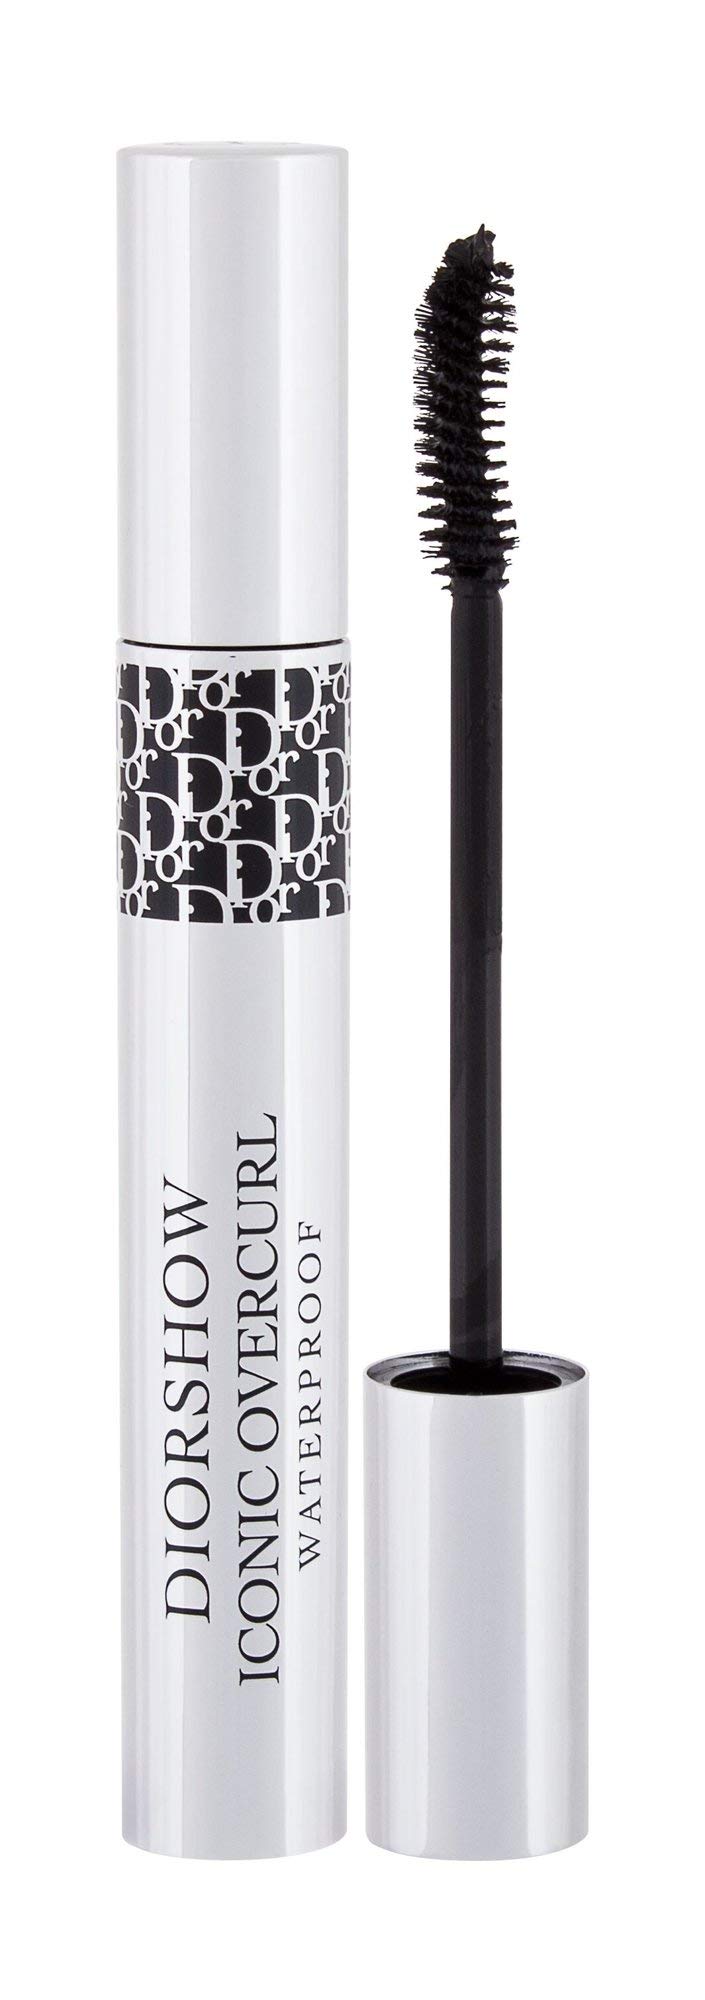 Dior Diorshow Iconic Overcurl Waterproof 24H Mascara Spectacular (091) Ounce 0.21 Black